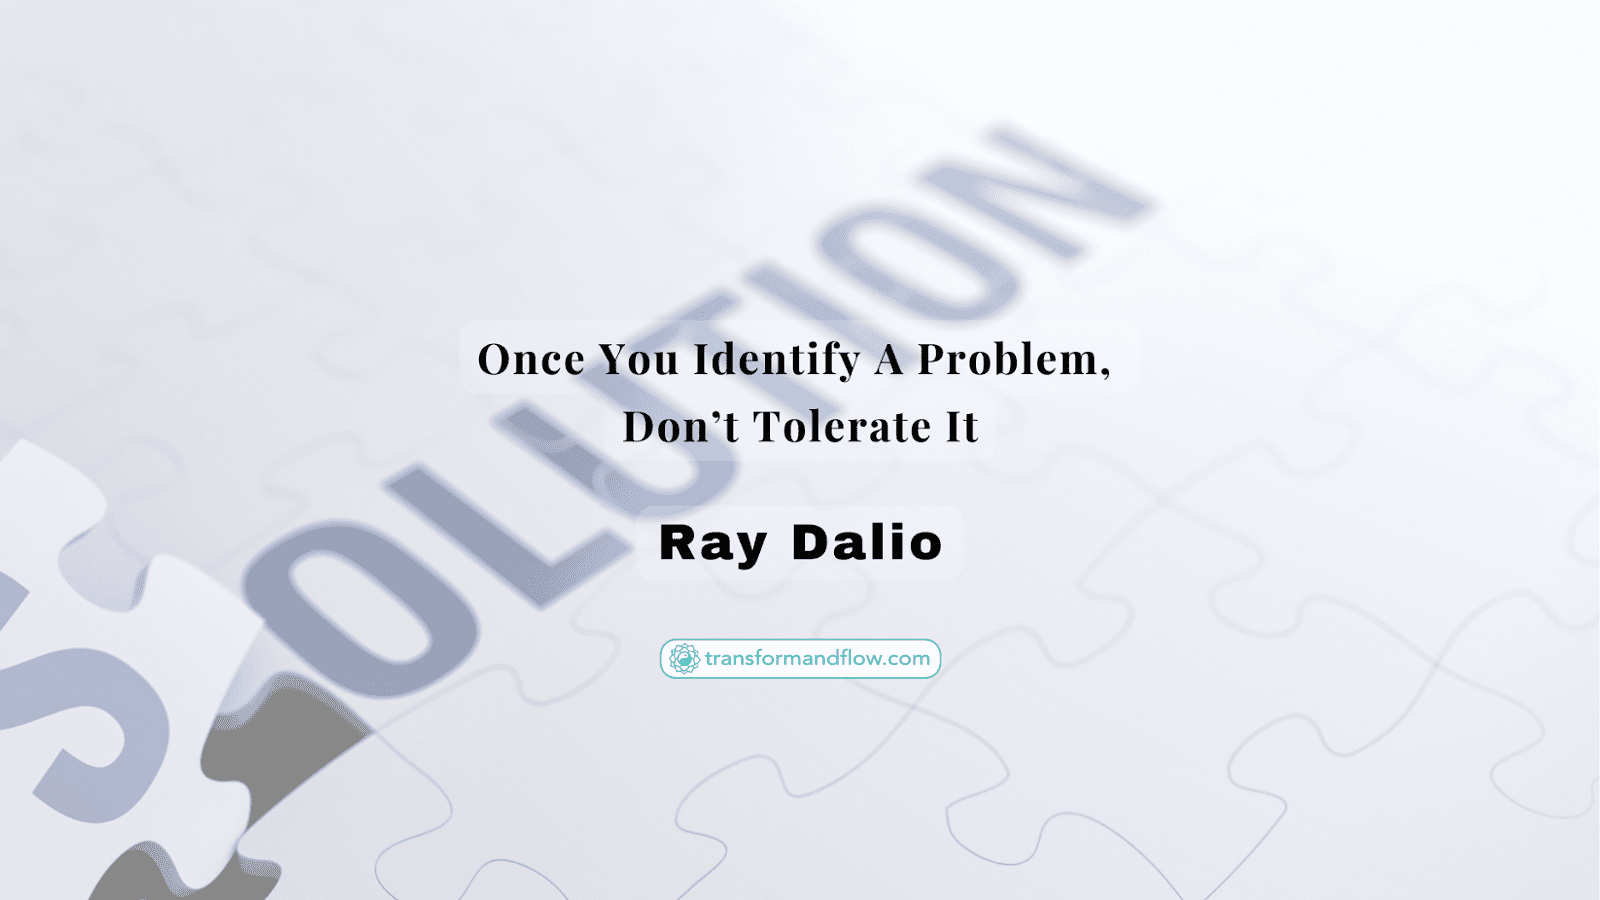 Once You Identify A Problem, Don't Tolerate It. Ray Dalio